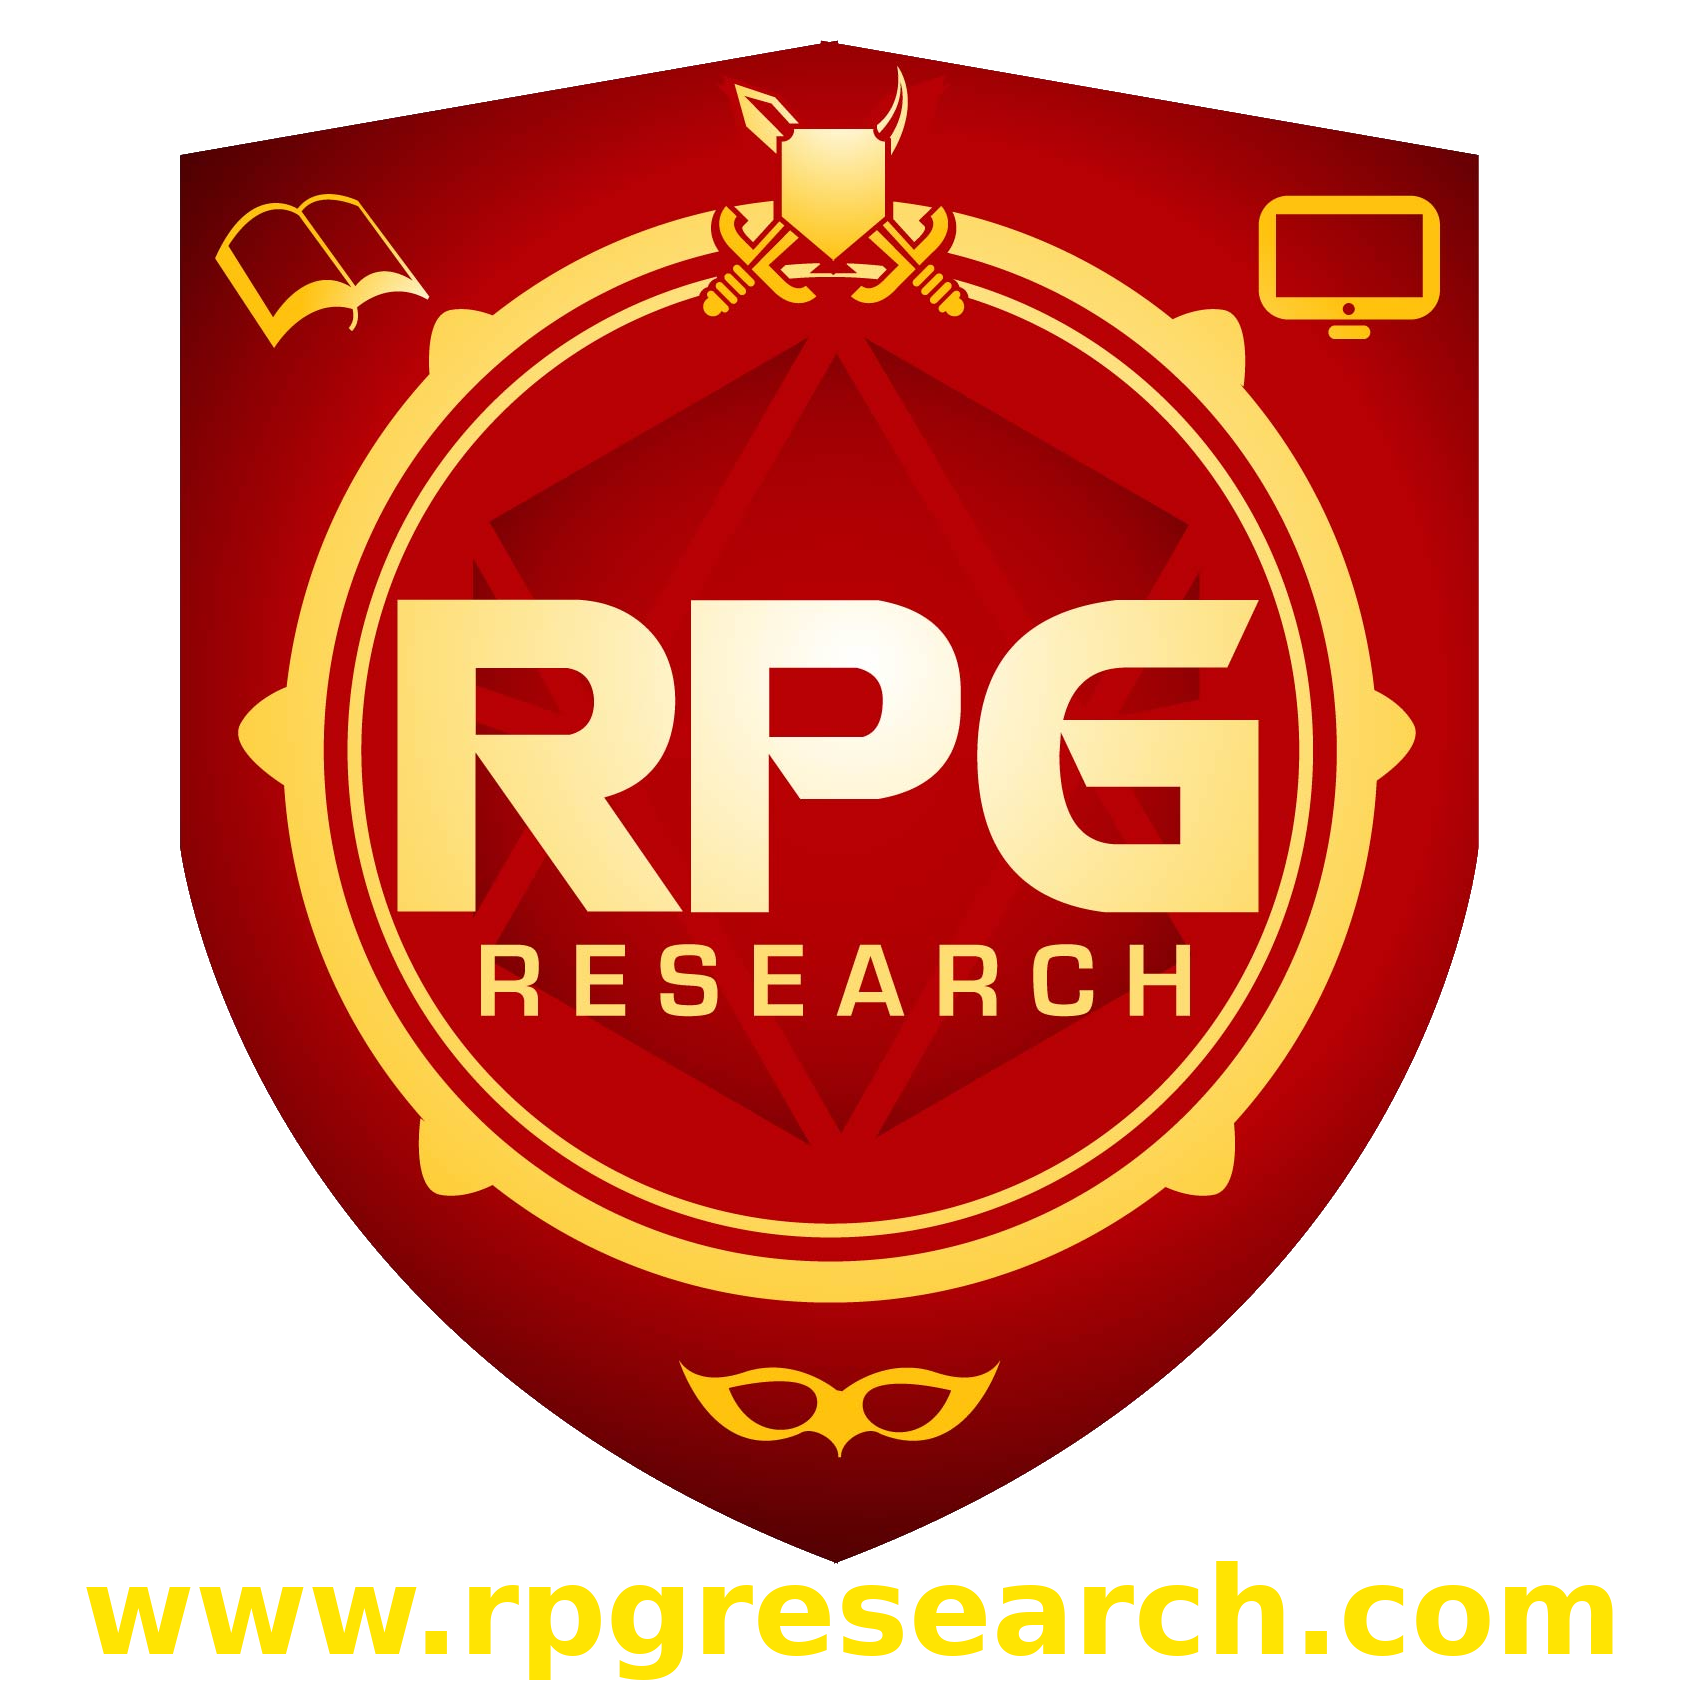 RPG-Research-logo_DD66a4a-1a-1700sq-with-URL-transparent.png